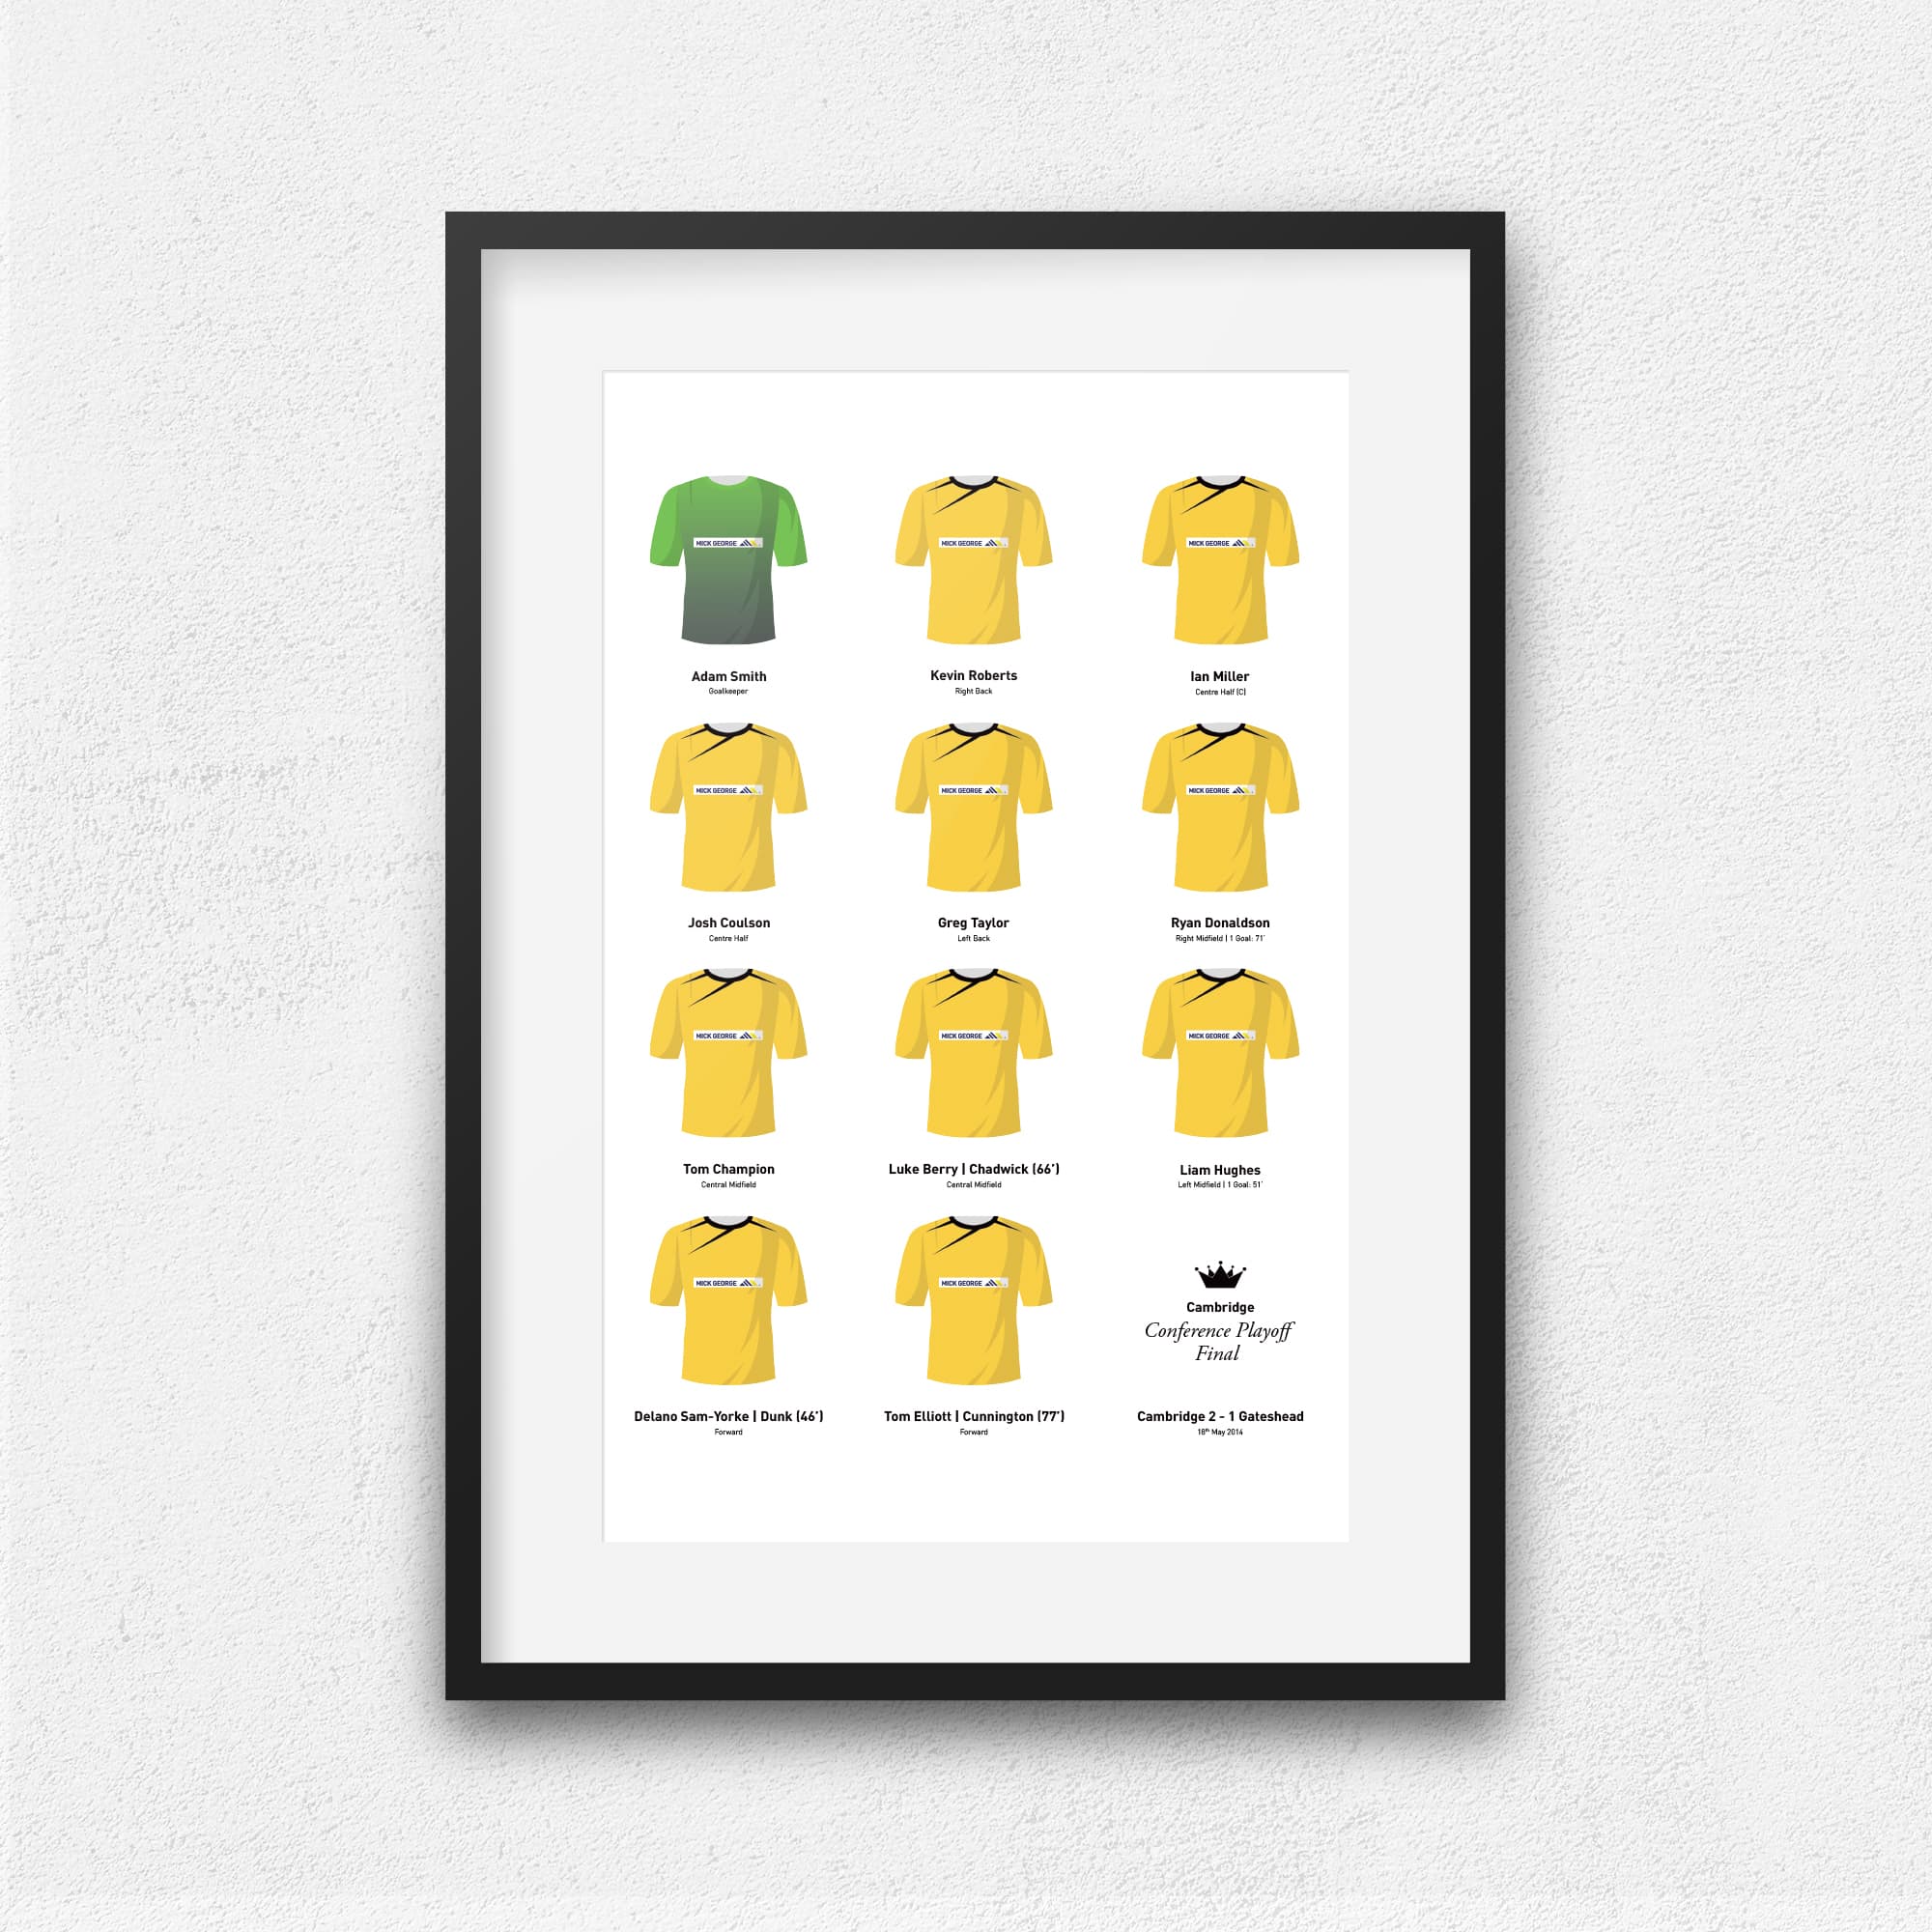 Cambridge 2014 Conference Playoff Winners Football Team Print Good Team On Paper